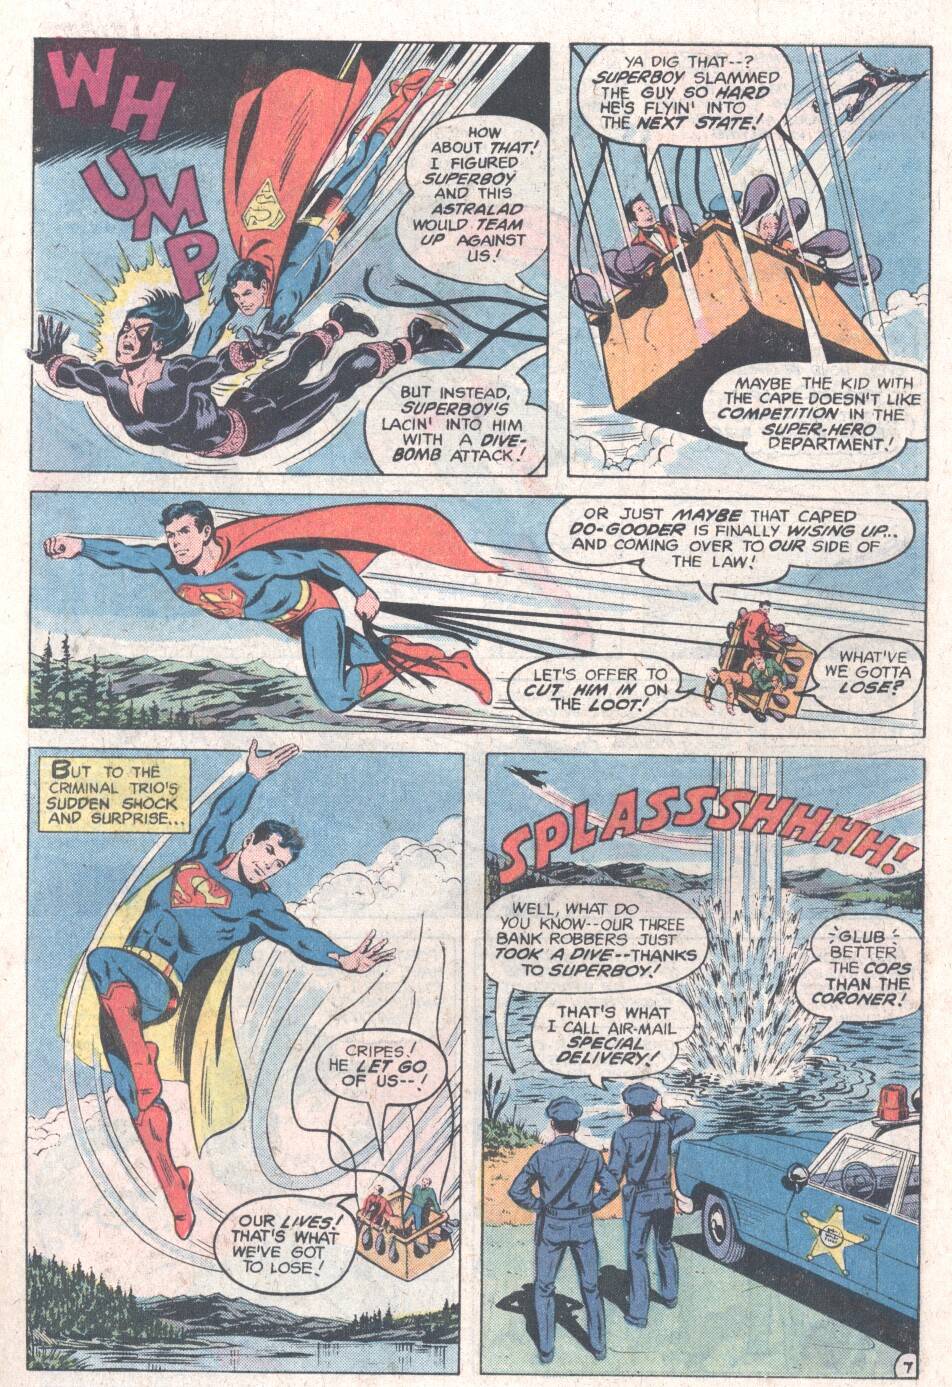 The New Adventures of Superboy 4 Page 7